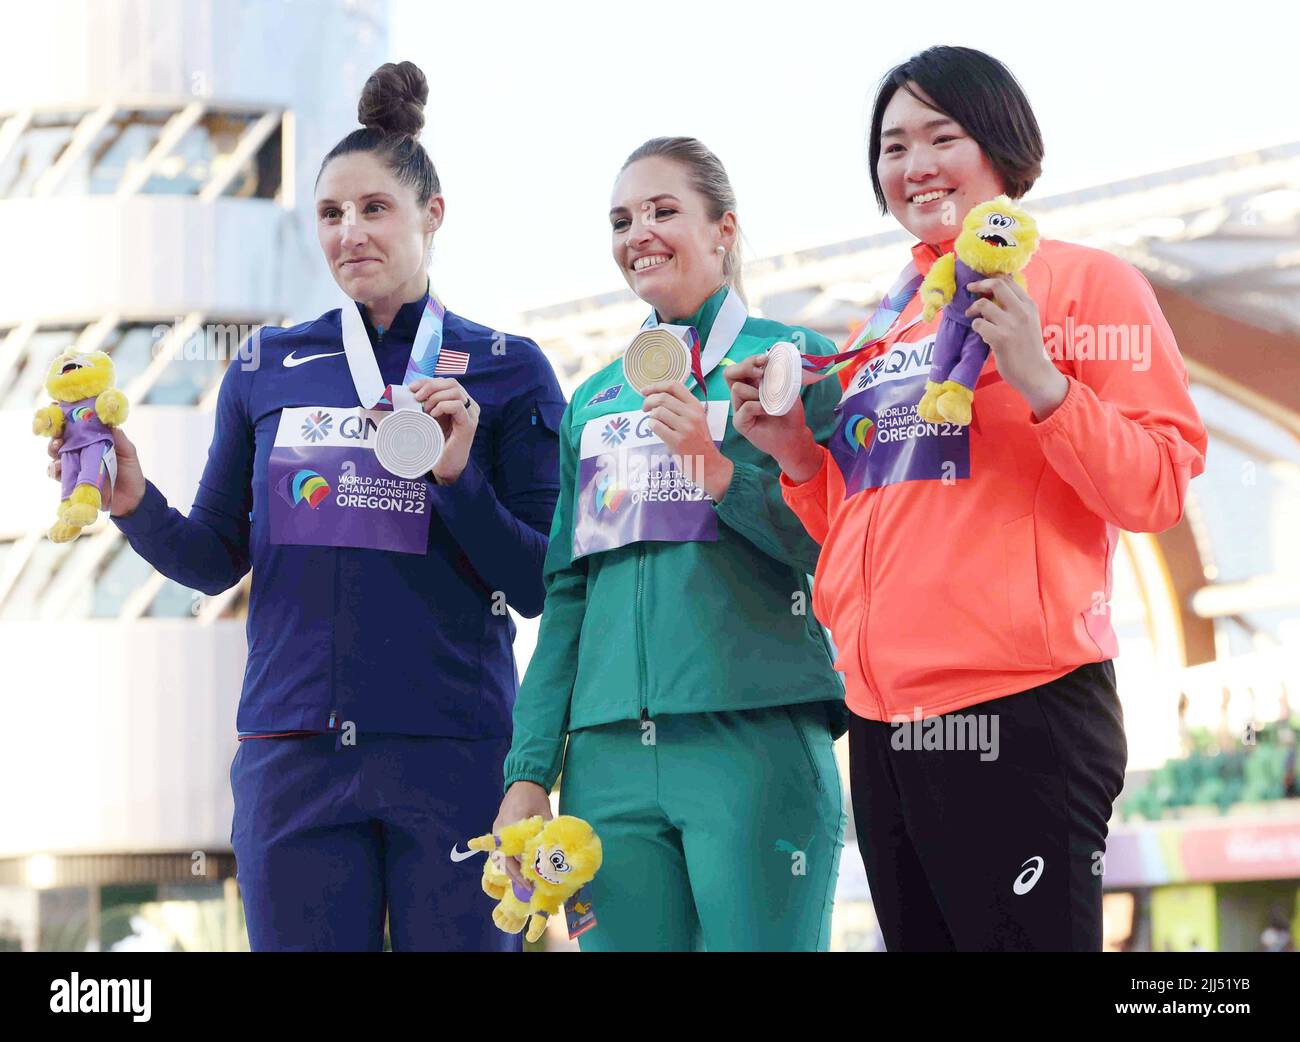 Oregon, USA. 23rd July, 2022. Australia's Kelsey-Lee Barber (C) poses with her gold medal for the women's javelin throw at the World Athletics Championships in Eugene, Oregon, on July 22, 2022, alongside silver medalist Kara Winger of the United States (L) and bronze medalist Haruka Kitaguchi of Japan. Credit: Newscom/Alamy Live News Stock Photo